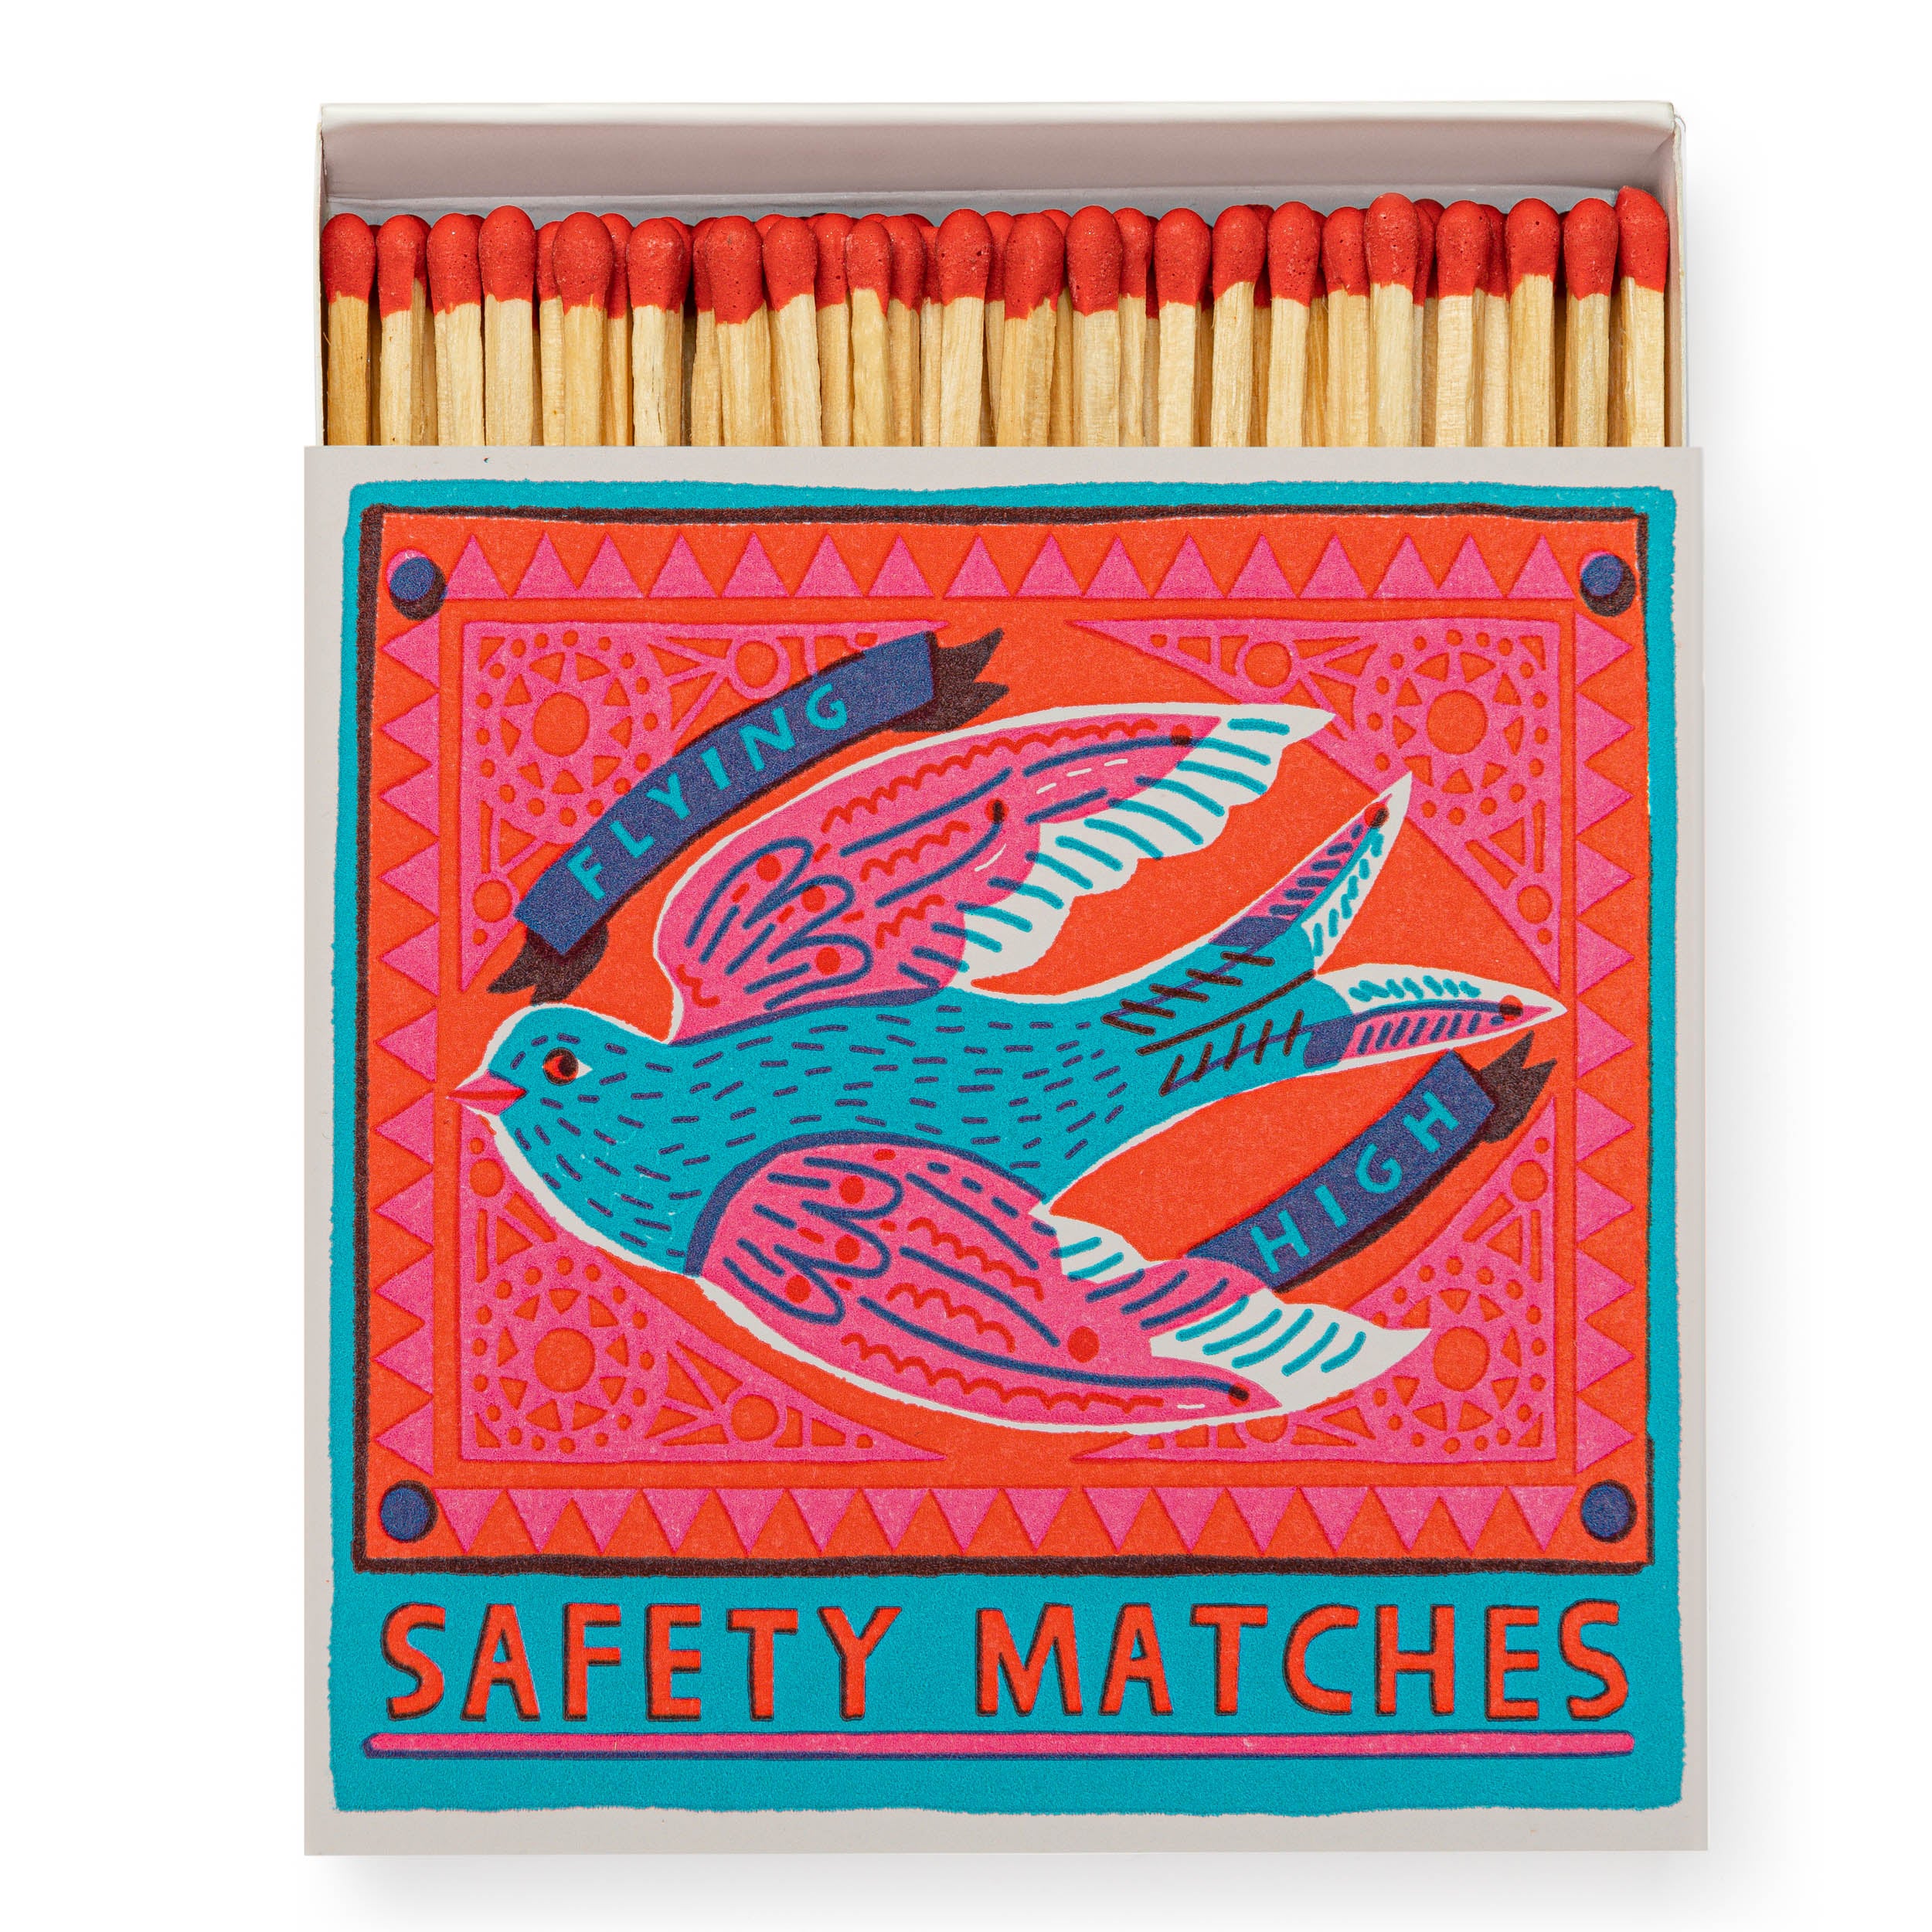 Archivist Square Matchbox - Flying High Safety Matches